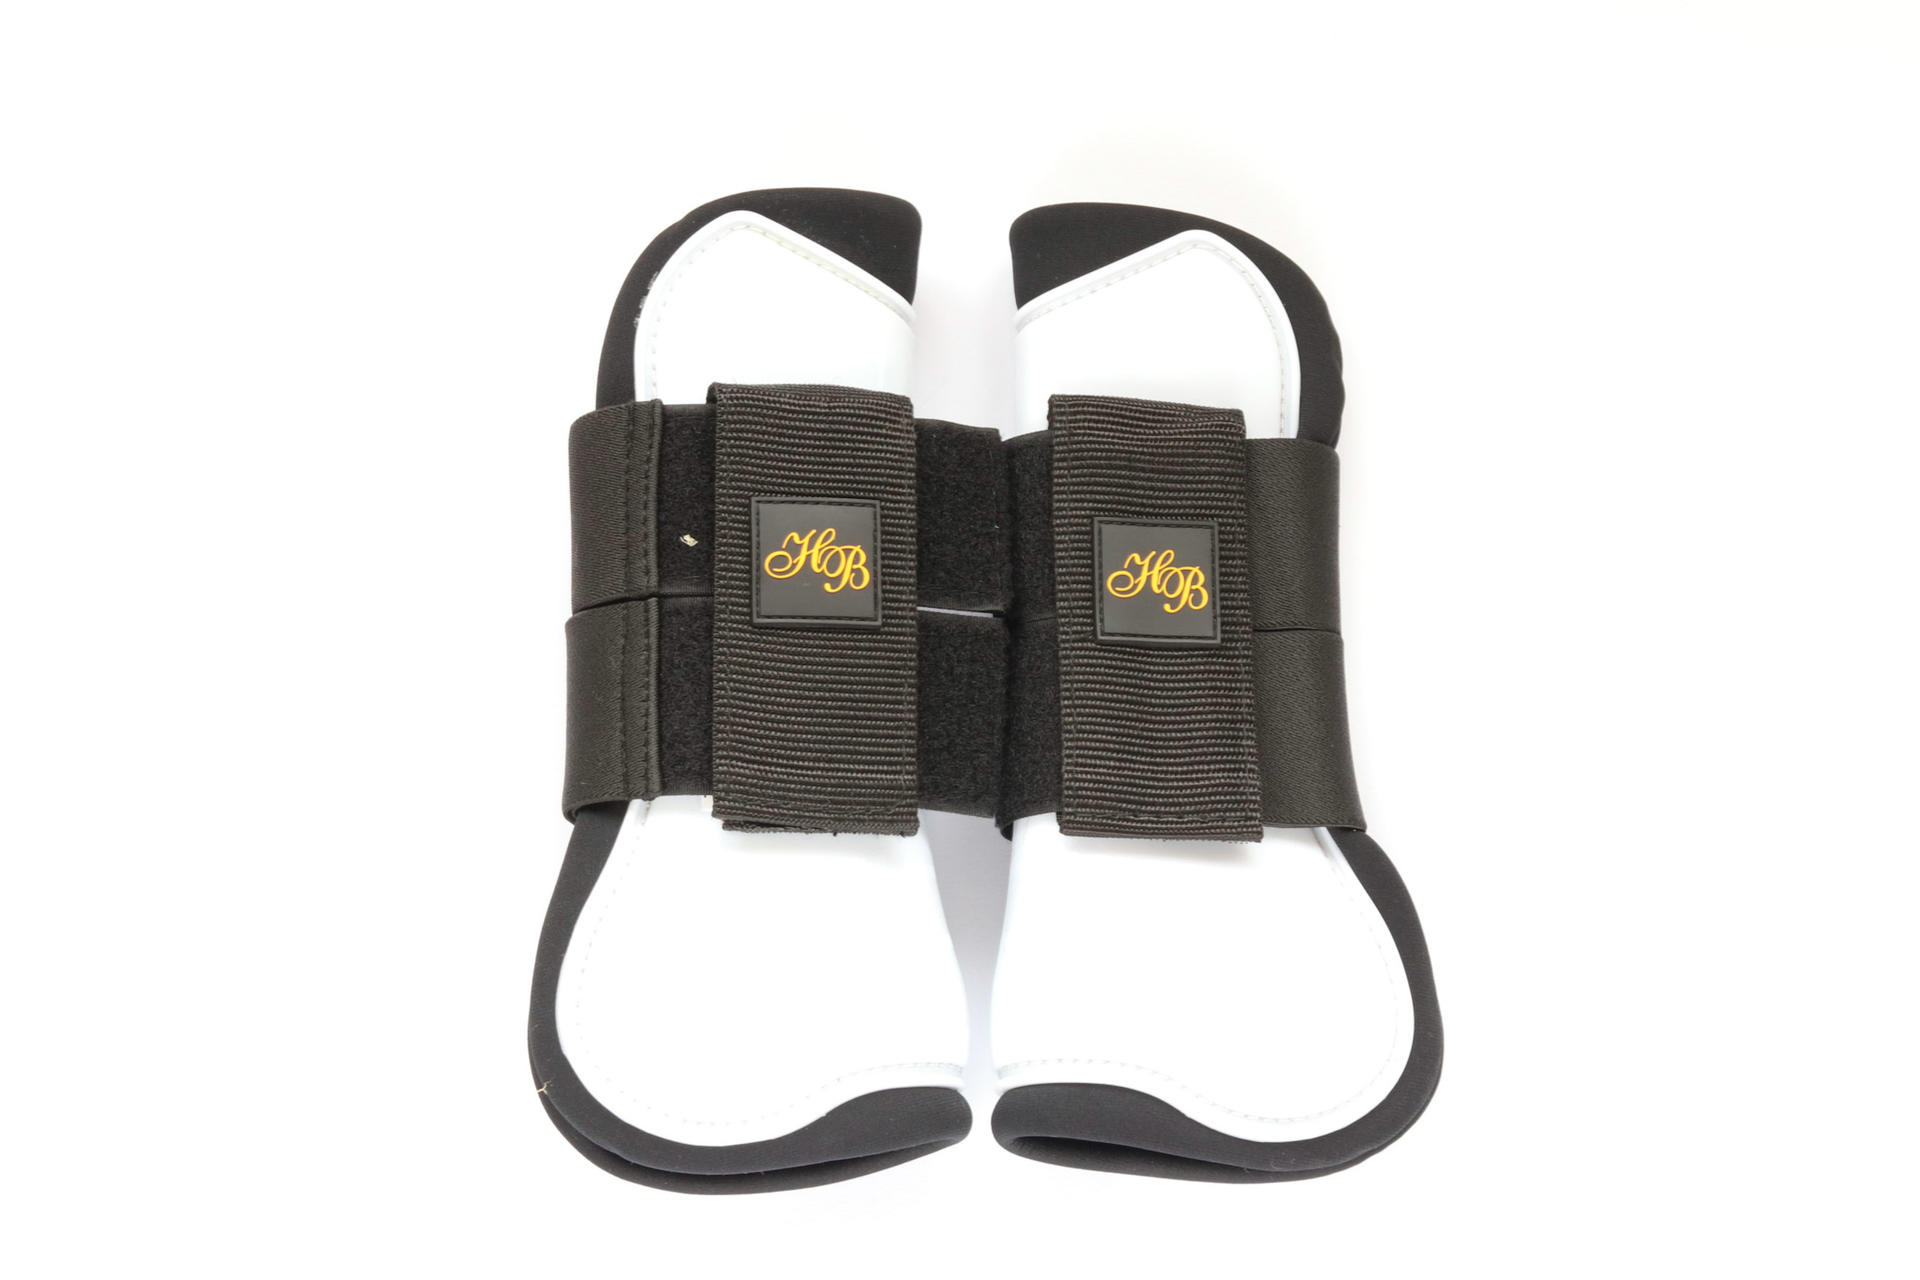 205 Luxury tendon protection  boots  shine  foot protection